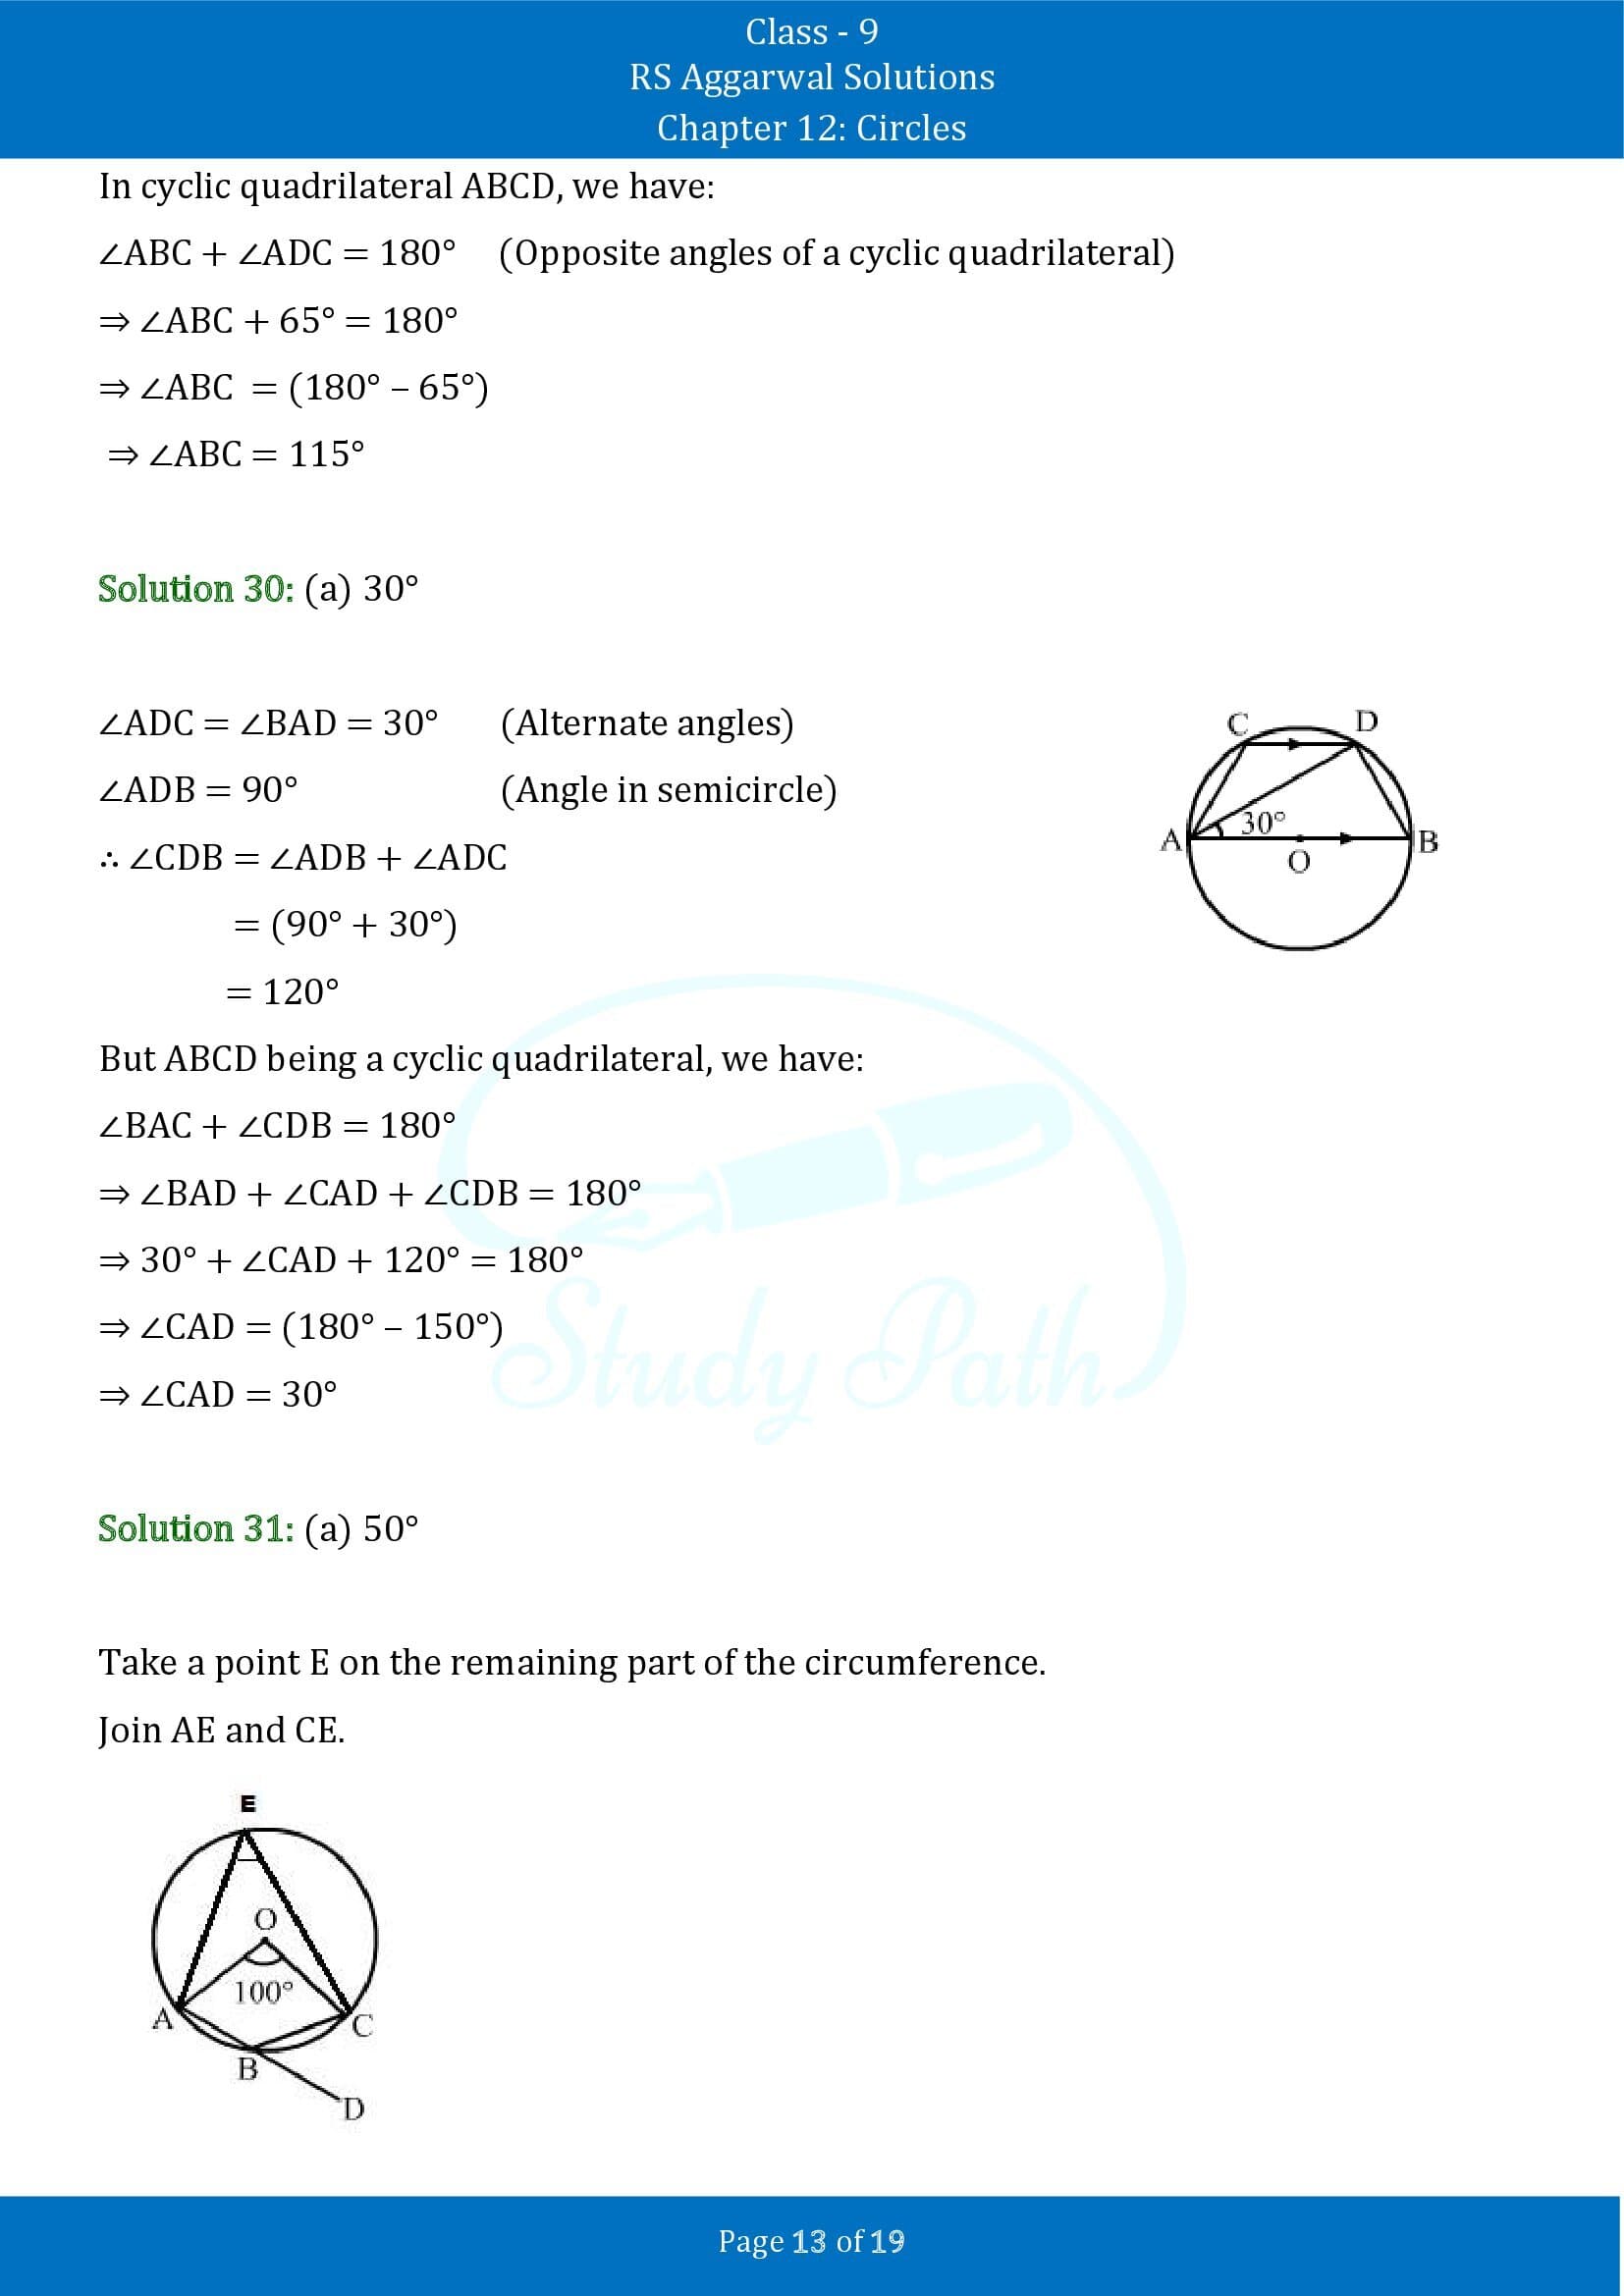 RS Aggarwal Solutions Class 9 Chapter 12 Circles Multiple Choice Questions MCQs 00013